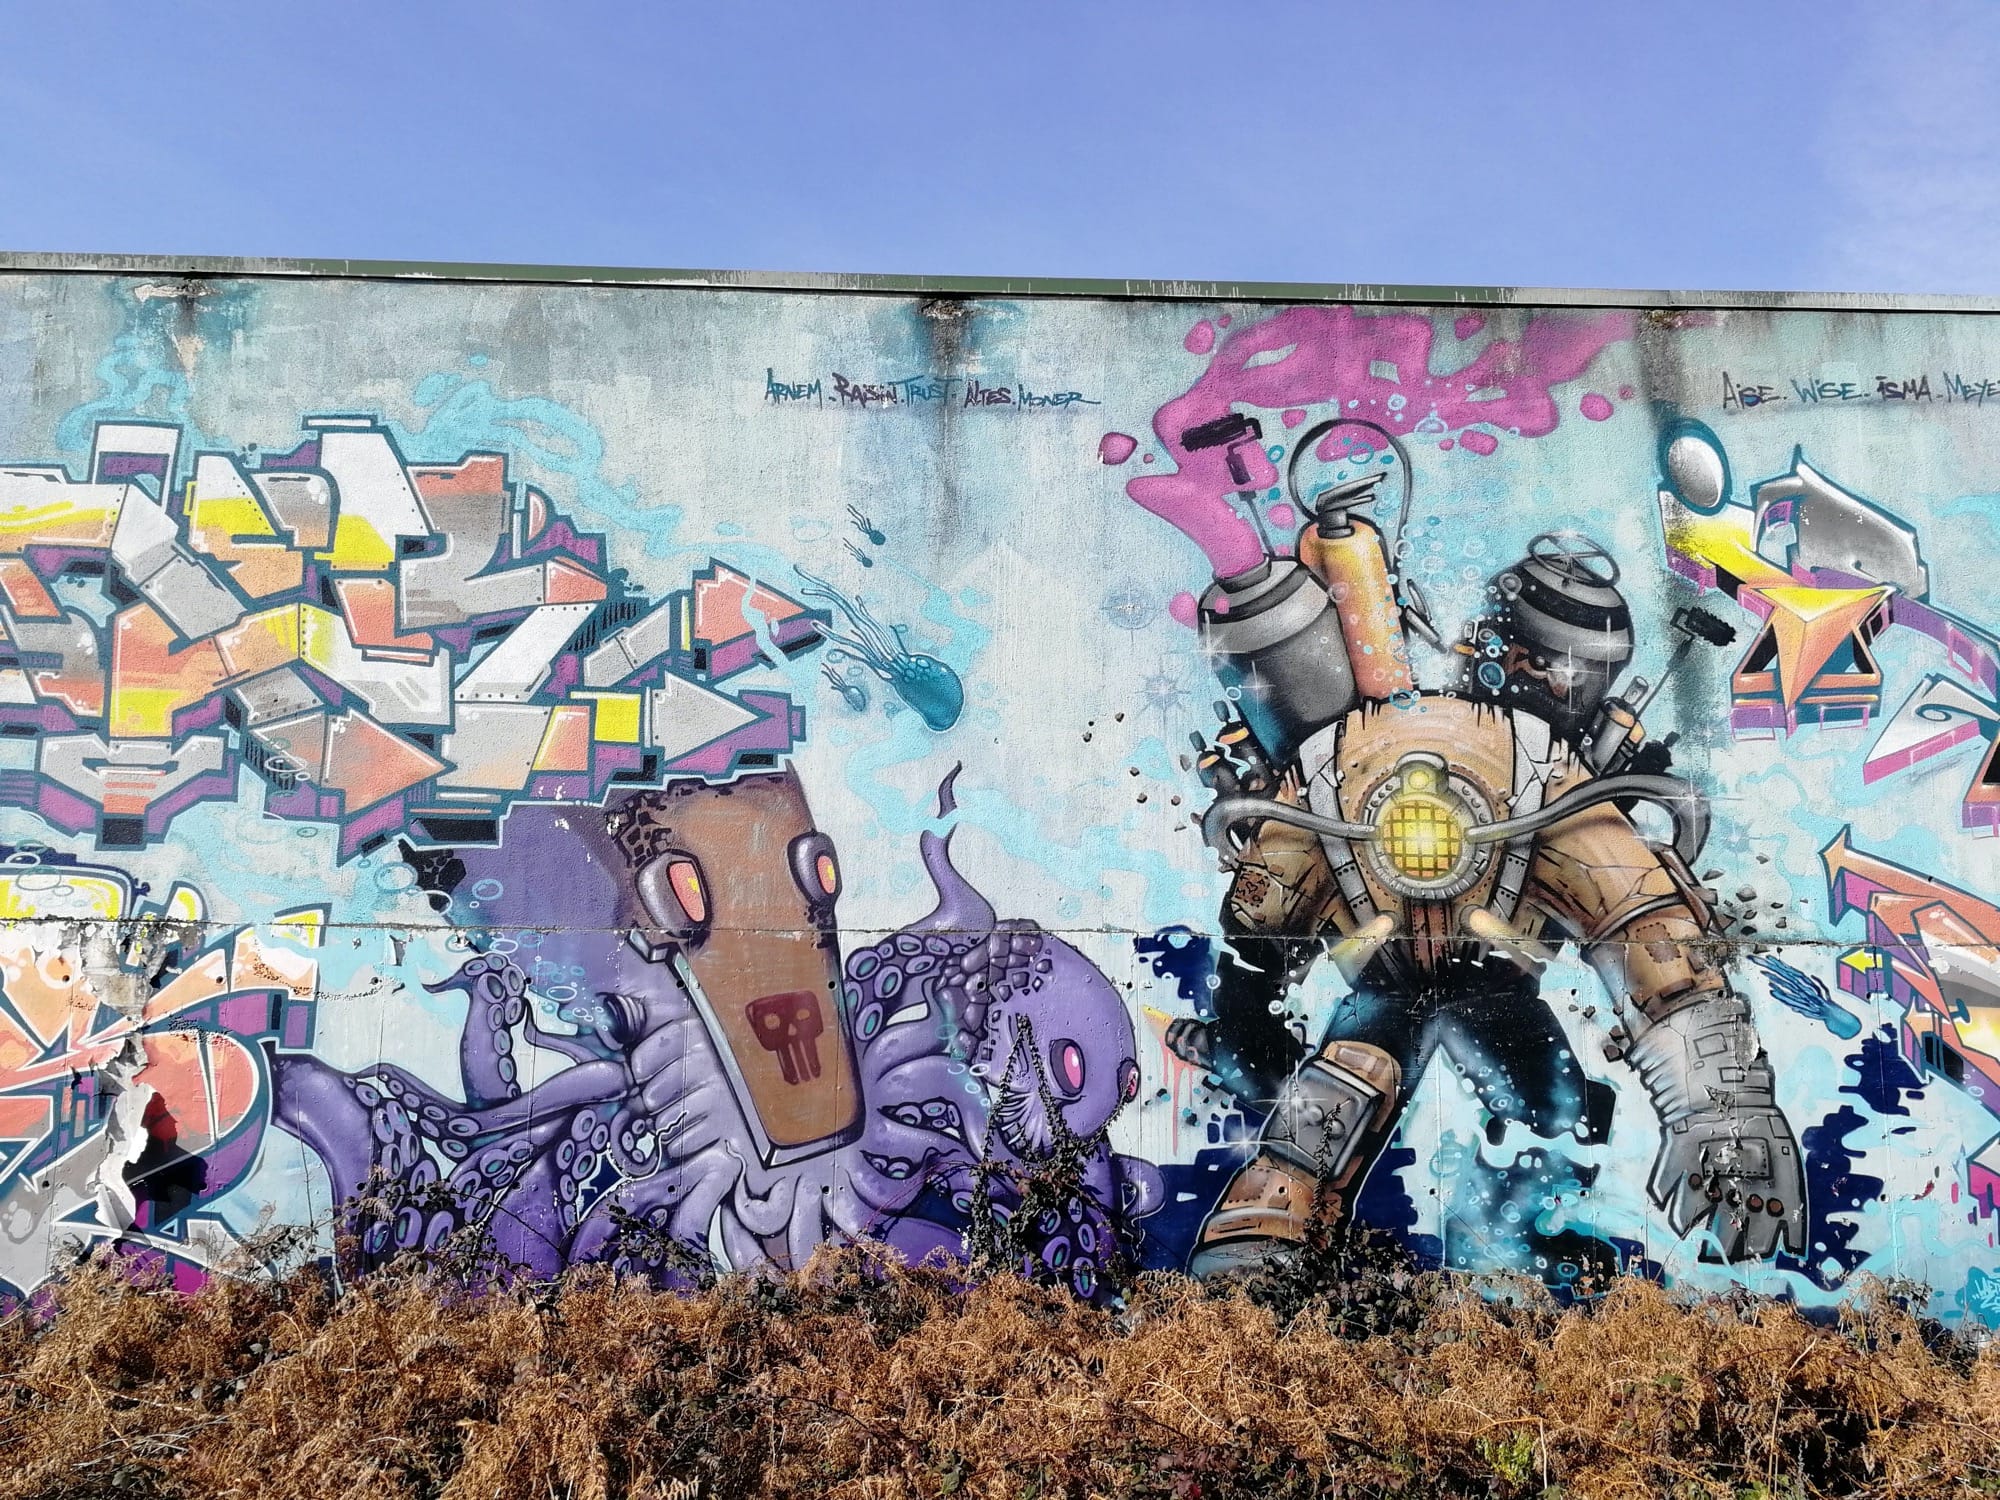 Graffiti 1530 Out of control captured by Rabot in Nantes France